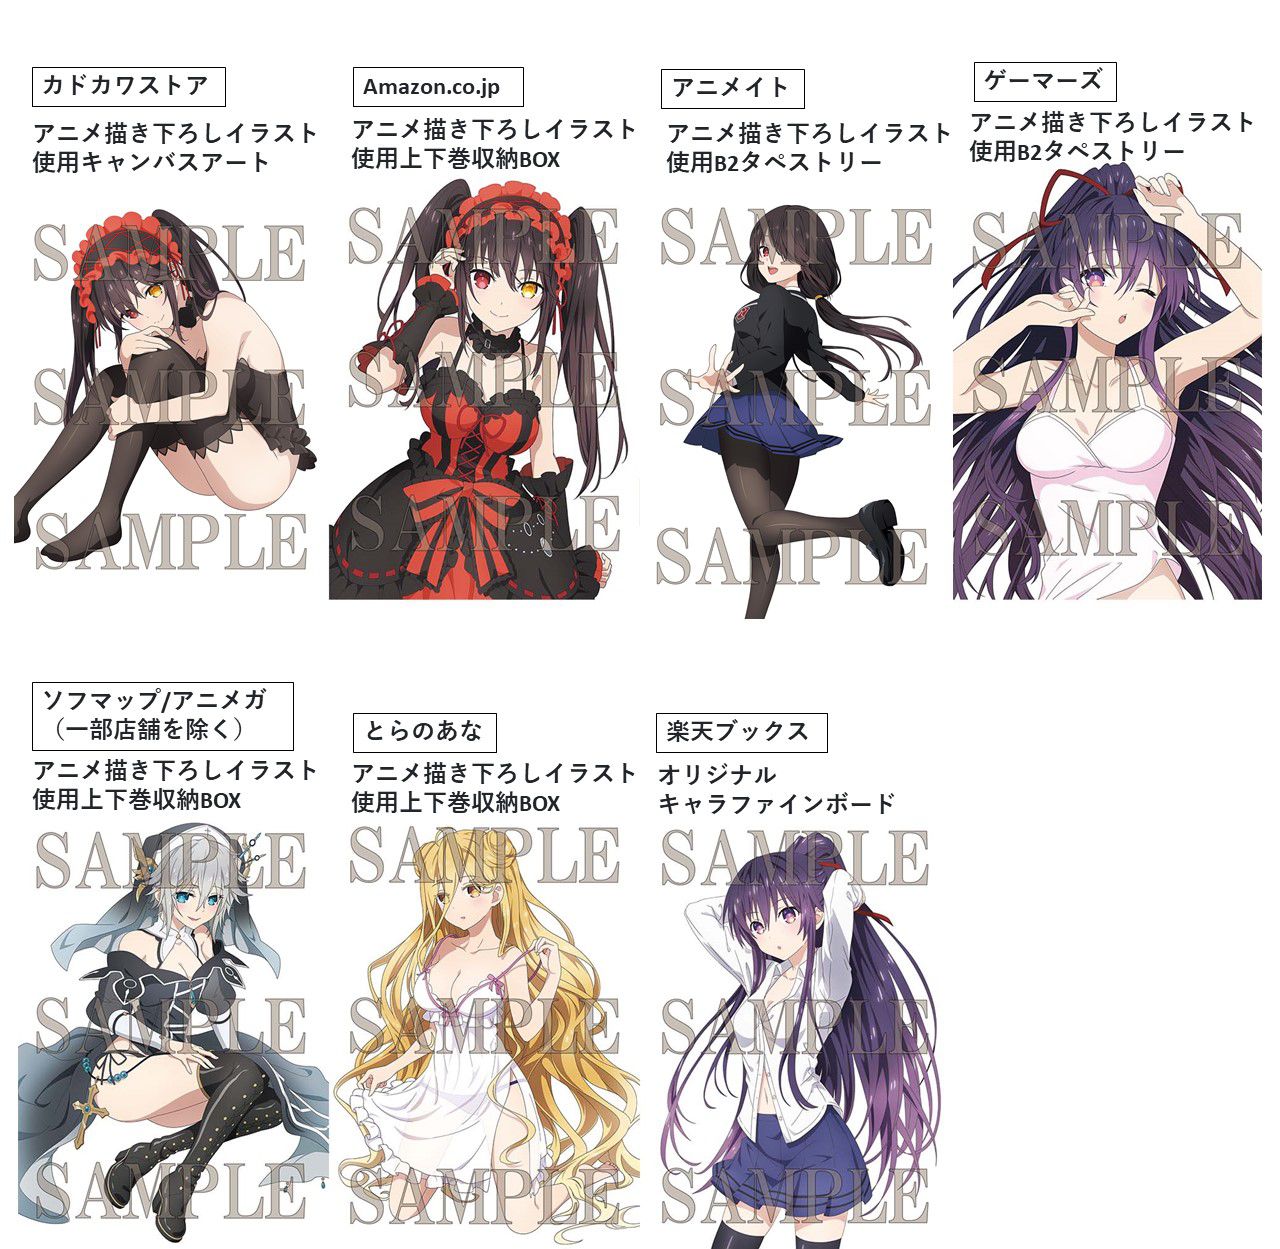 Anime [Date A Live] Erotic underwear full view illustrations etc. in BD / DVD store benefits of the 4th term! 2